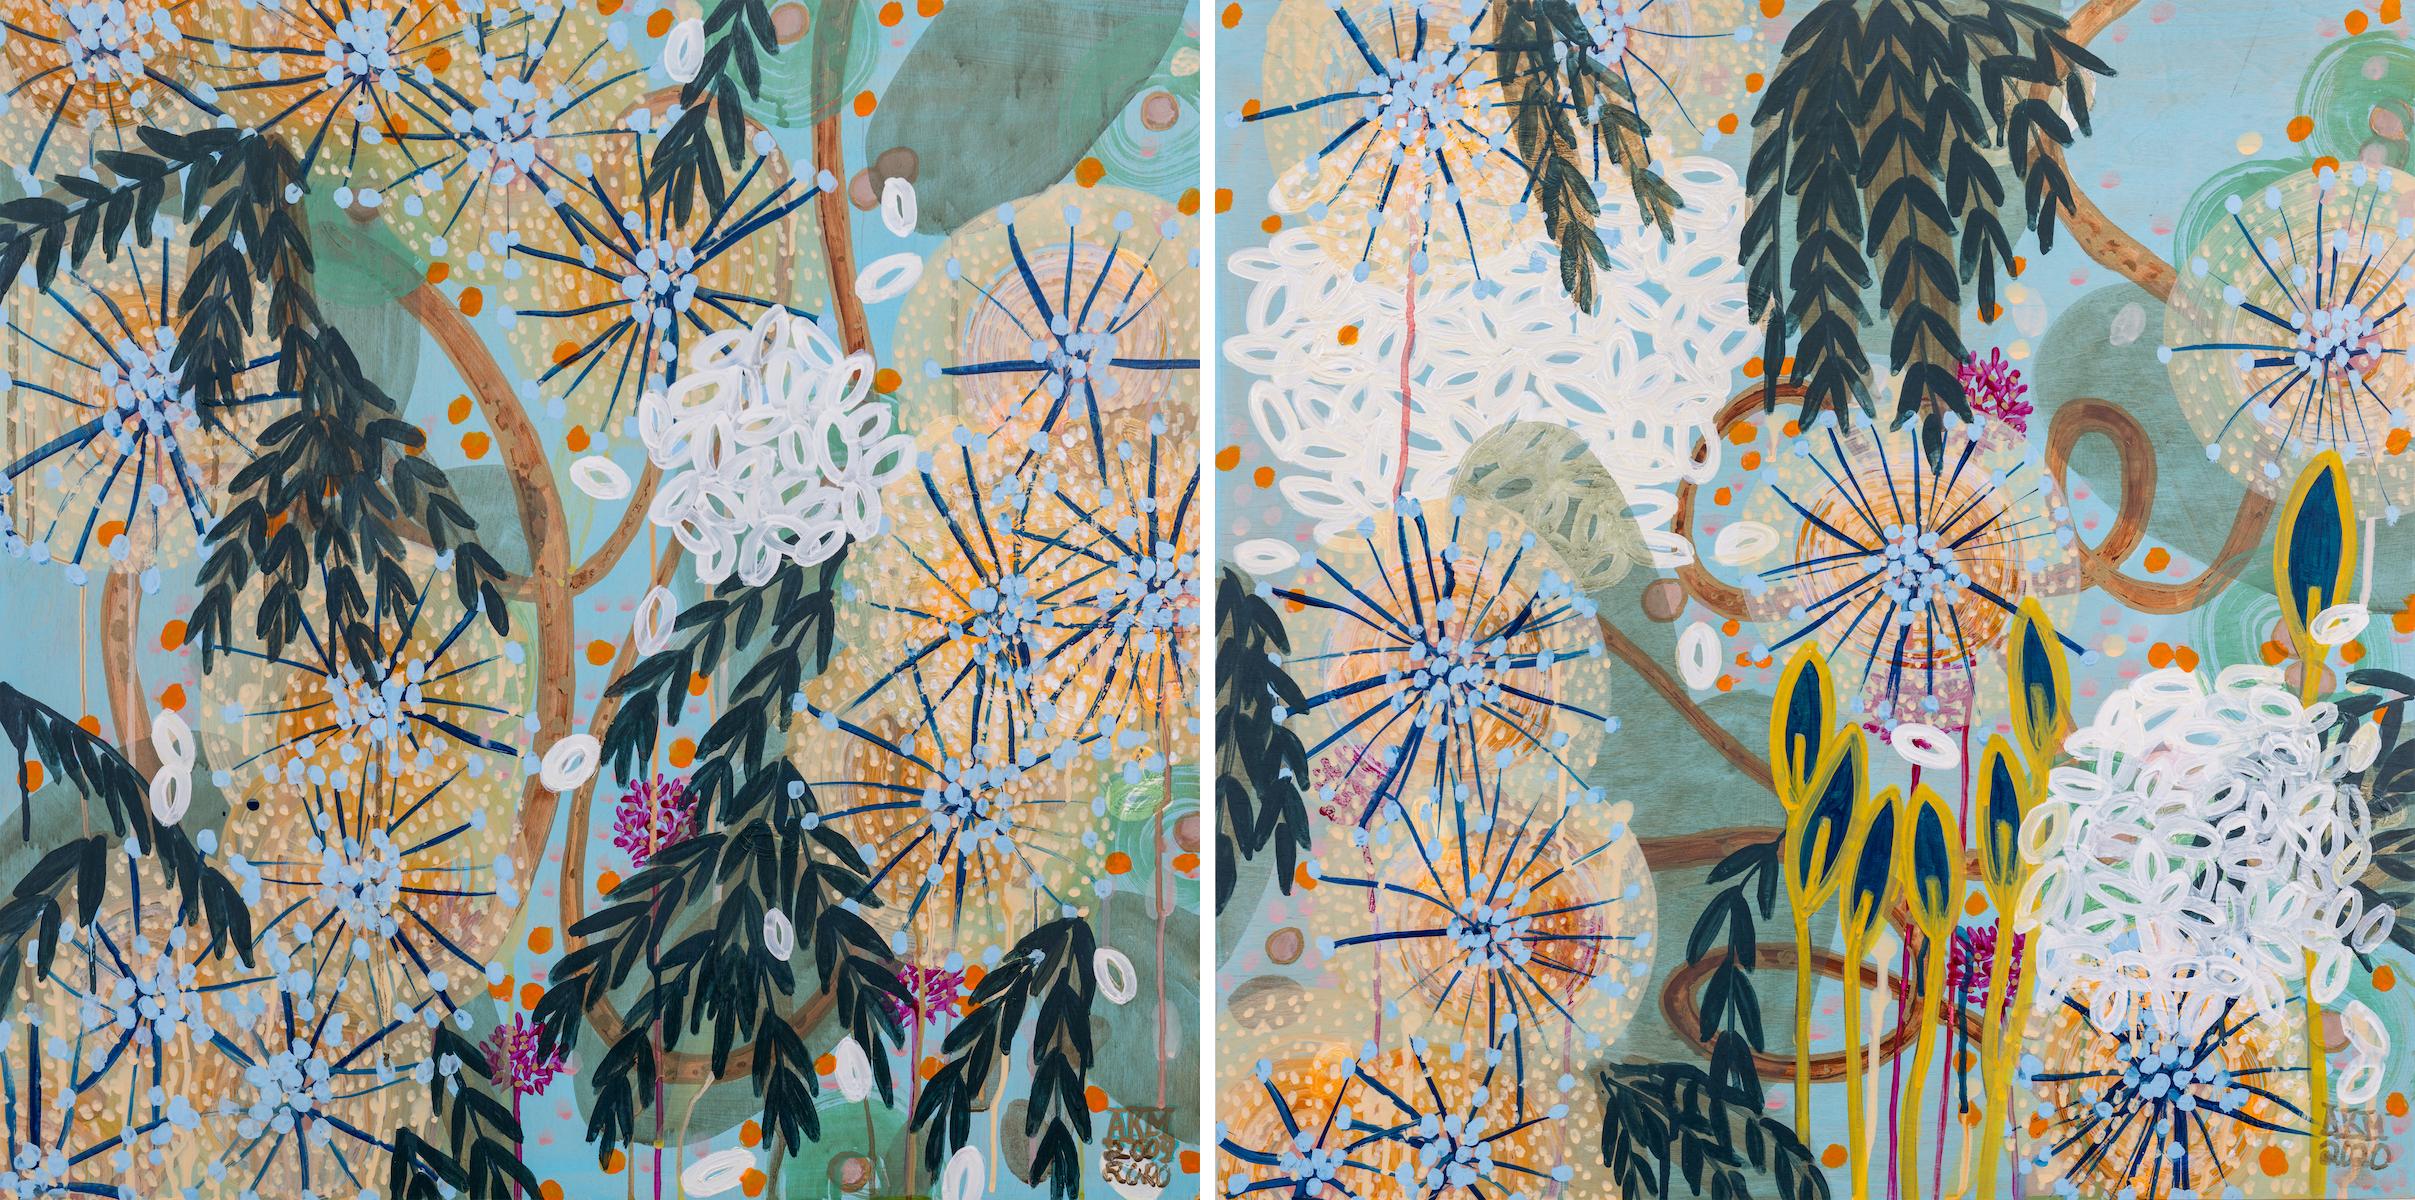 Alex K. Mason Landscape Painting - Abstract Nature Diptych Paintings Acrylic Ink Wood Panels. Blues, Greens, Yellow